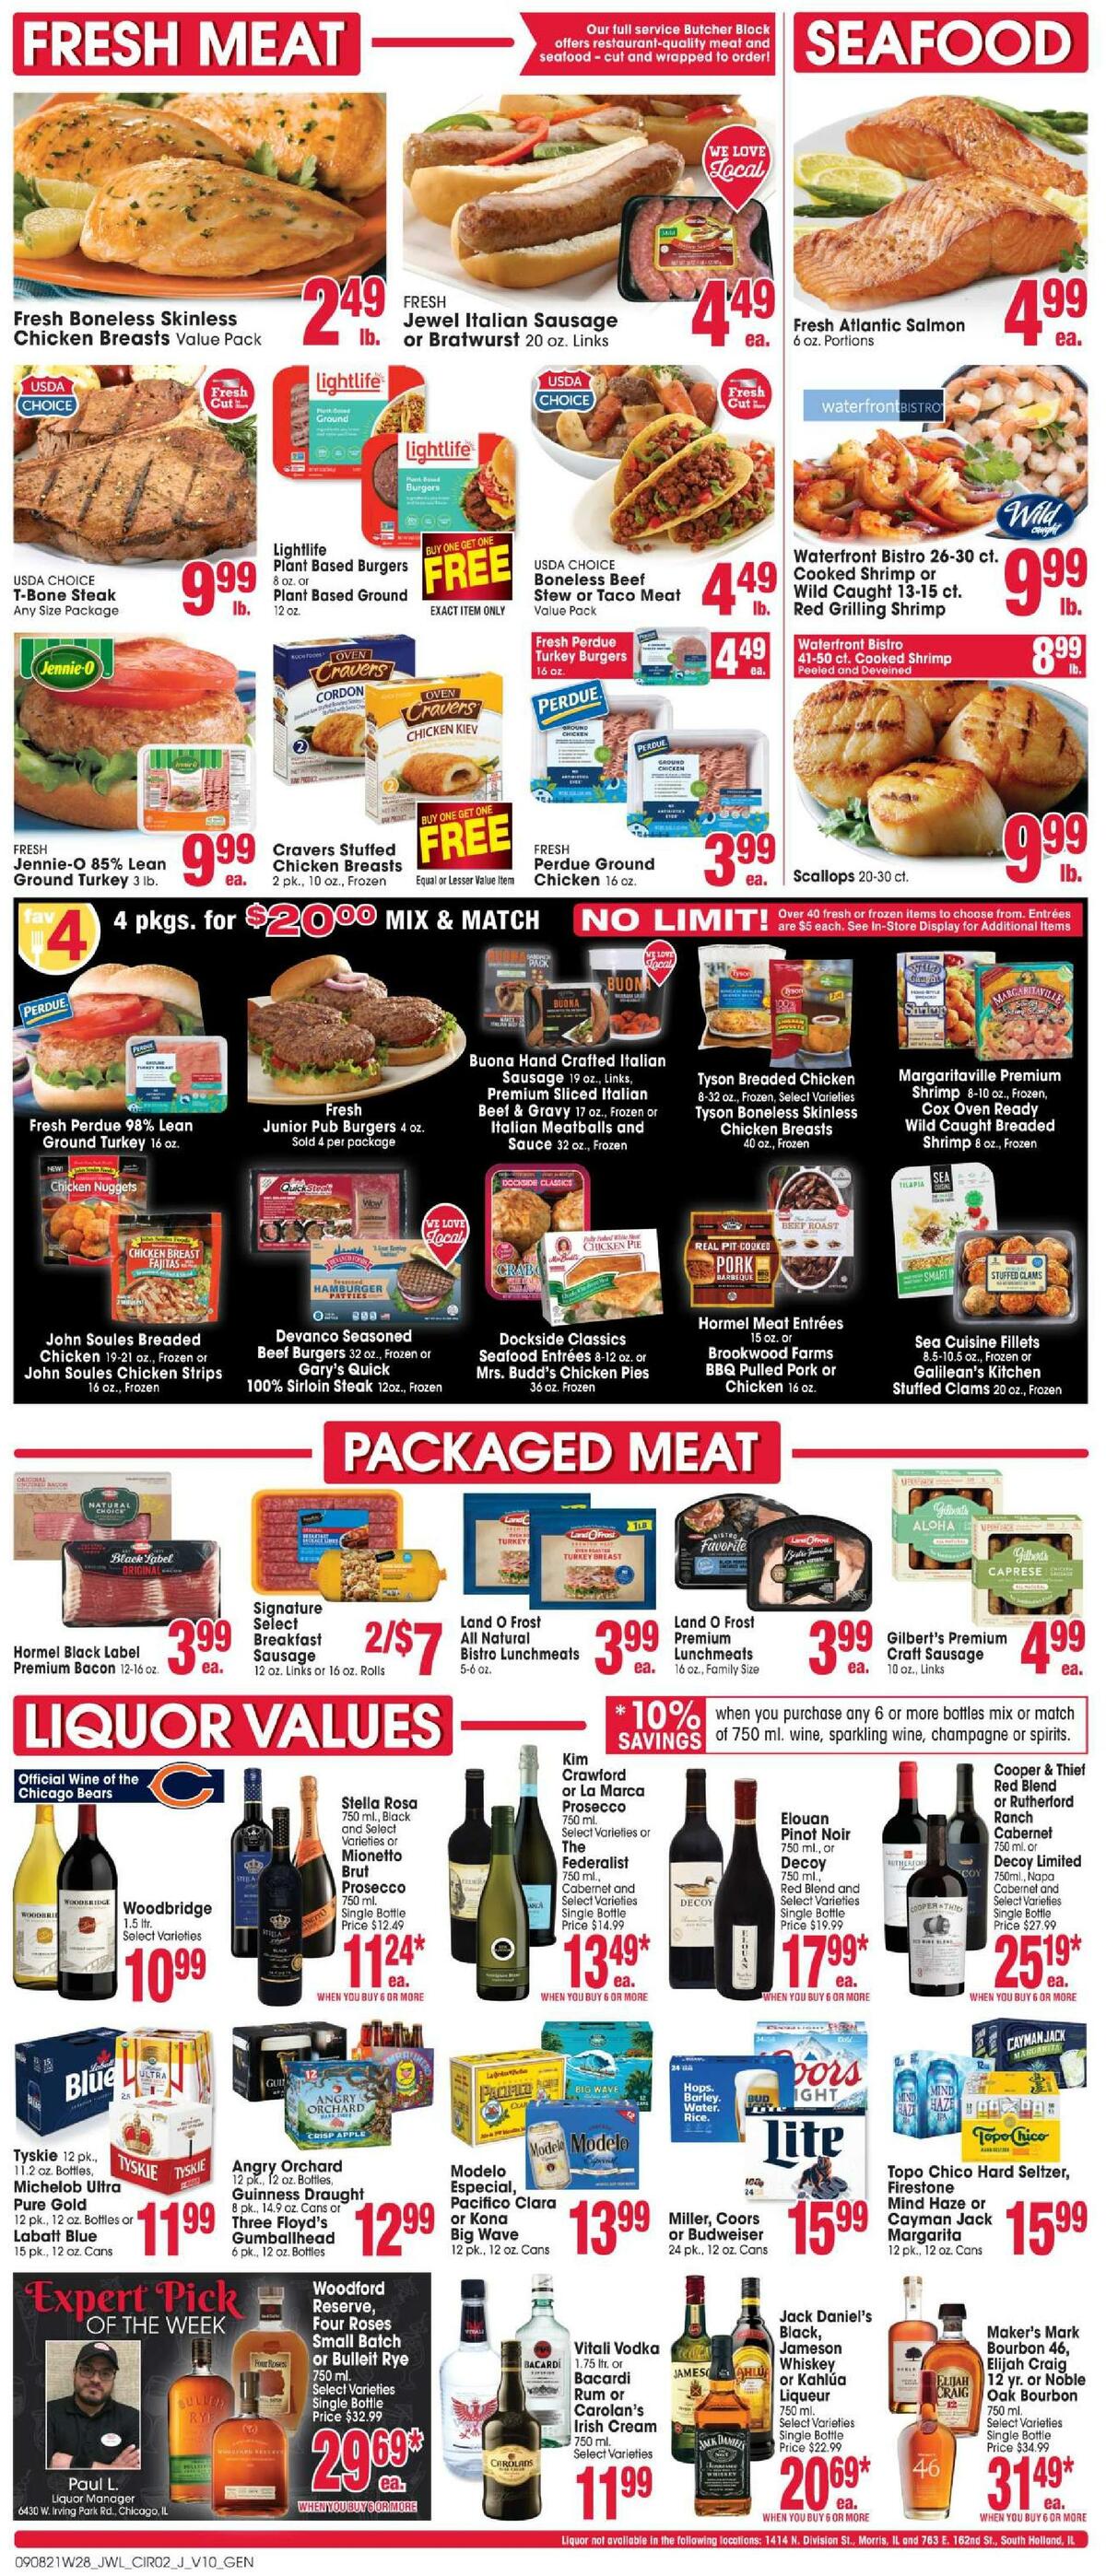 Jewel Osco Weekly Ad from September 8